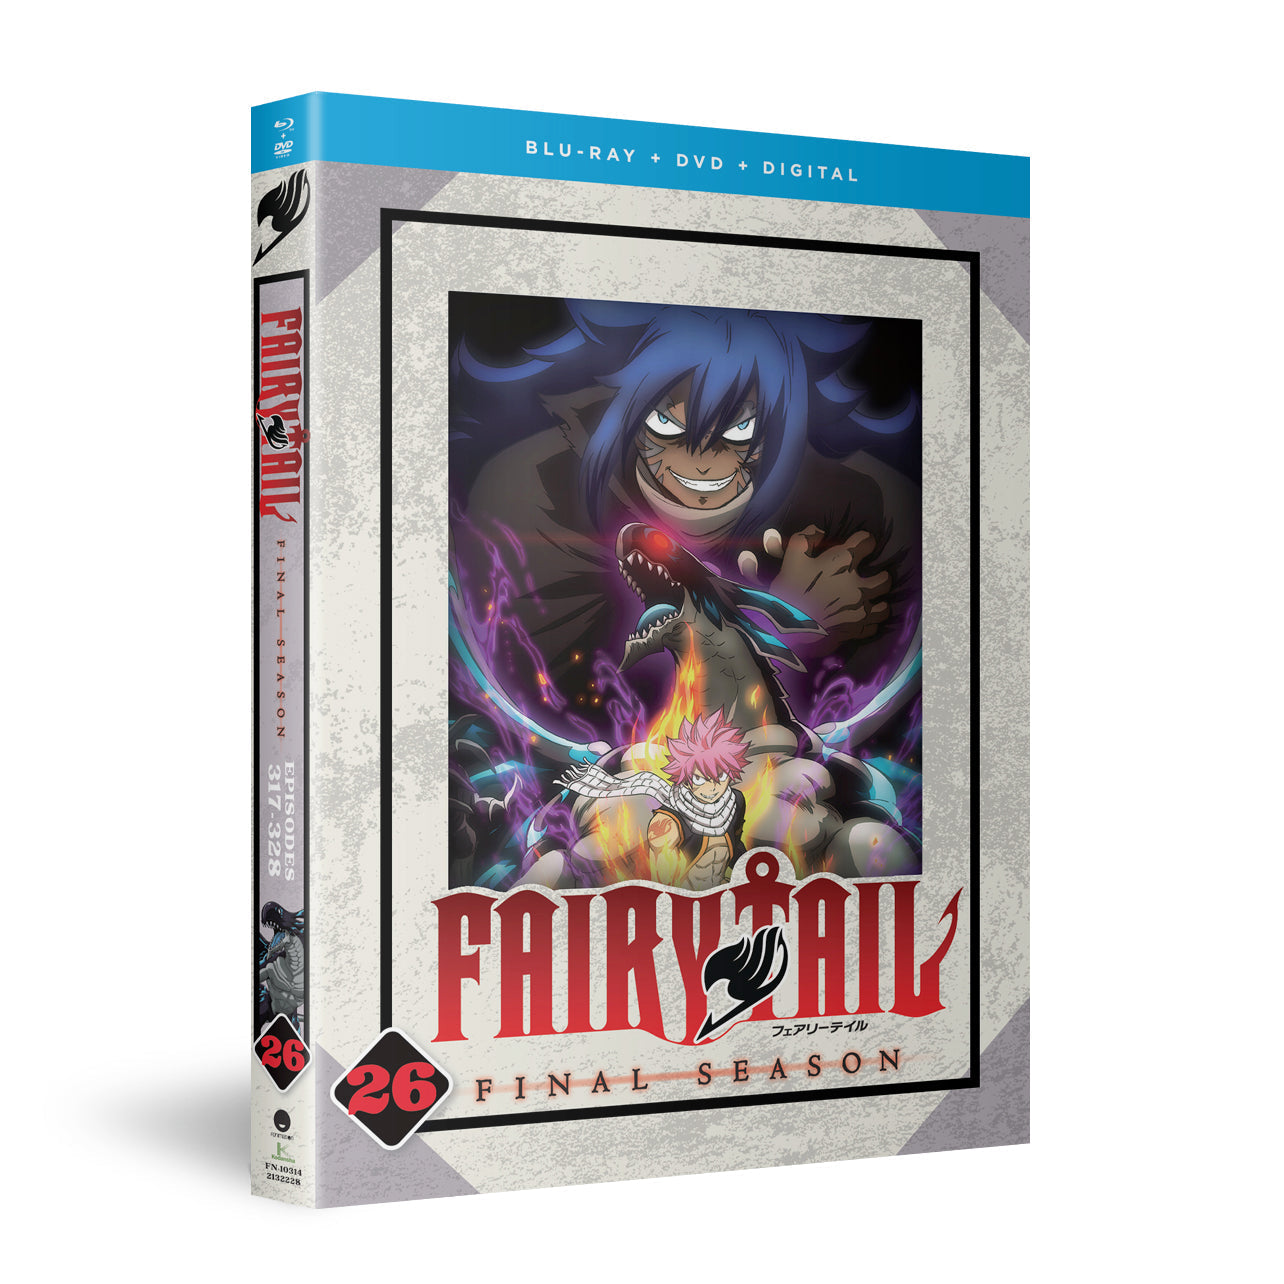 Fairy Tail Final Season - Part 26 - Blu-ray + DVD image count 2